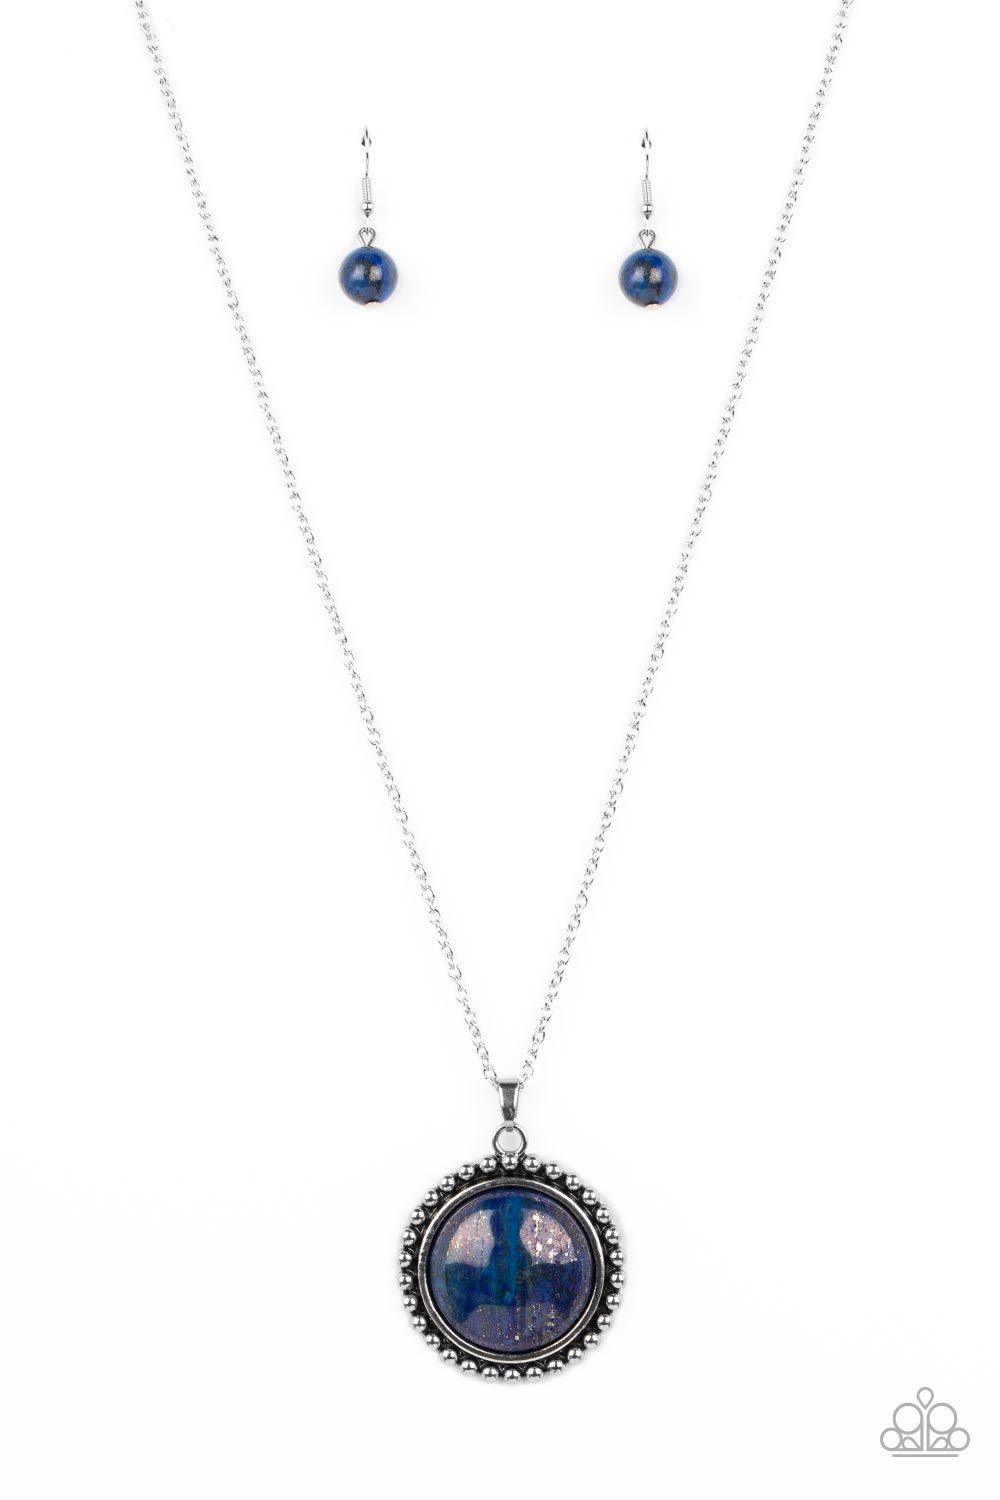 Sonoran Summer - Blue Lapis Stone/Studded Silver Frame Pendant Paparazzi Necklace & matching earrings